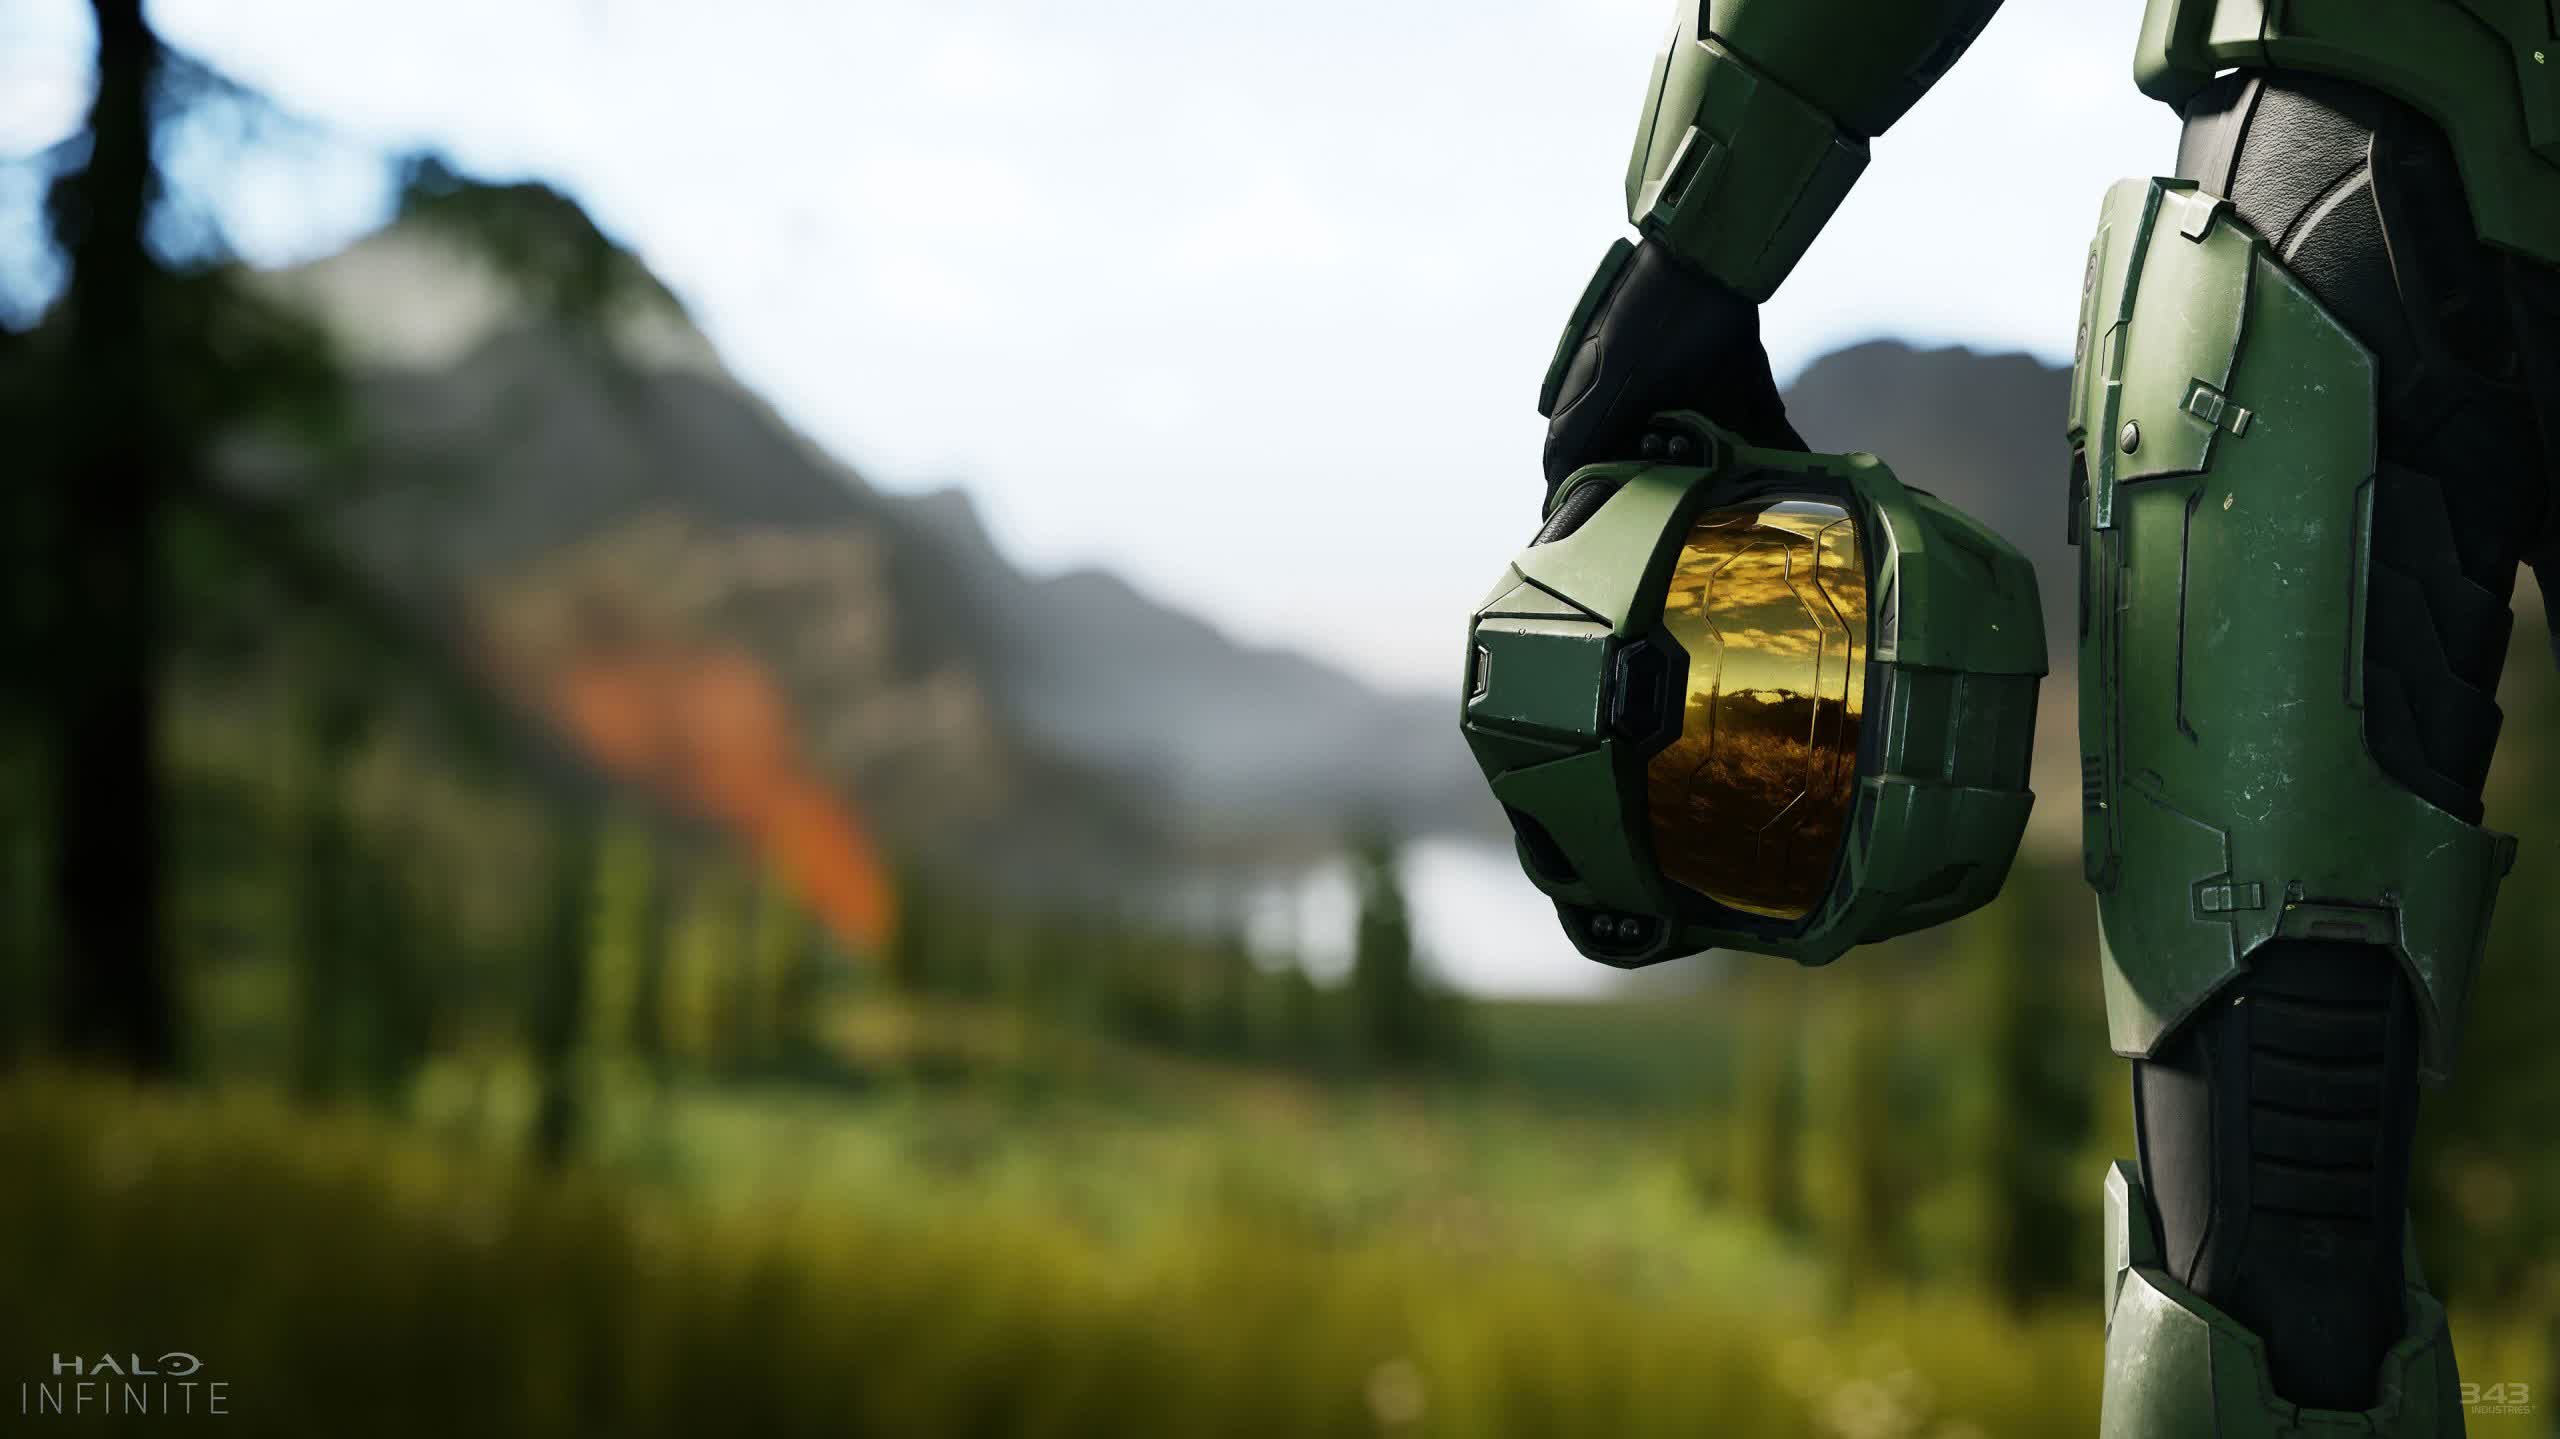 Halo Infinite Season 2 will allow players to earn store credits through game progression